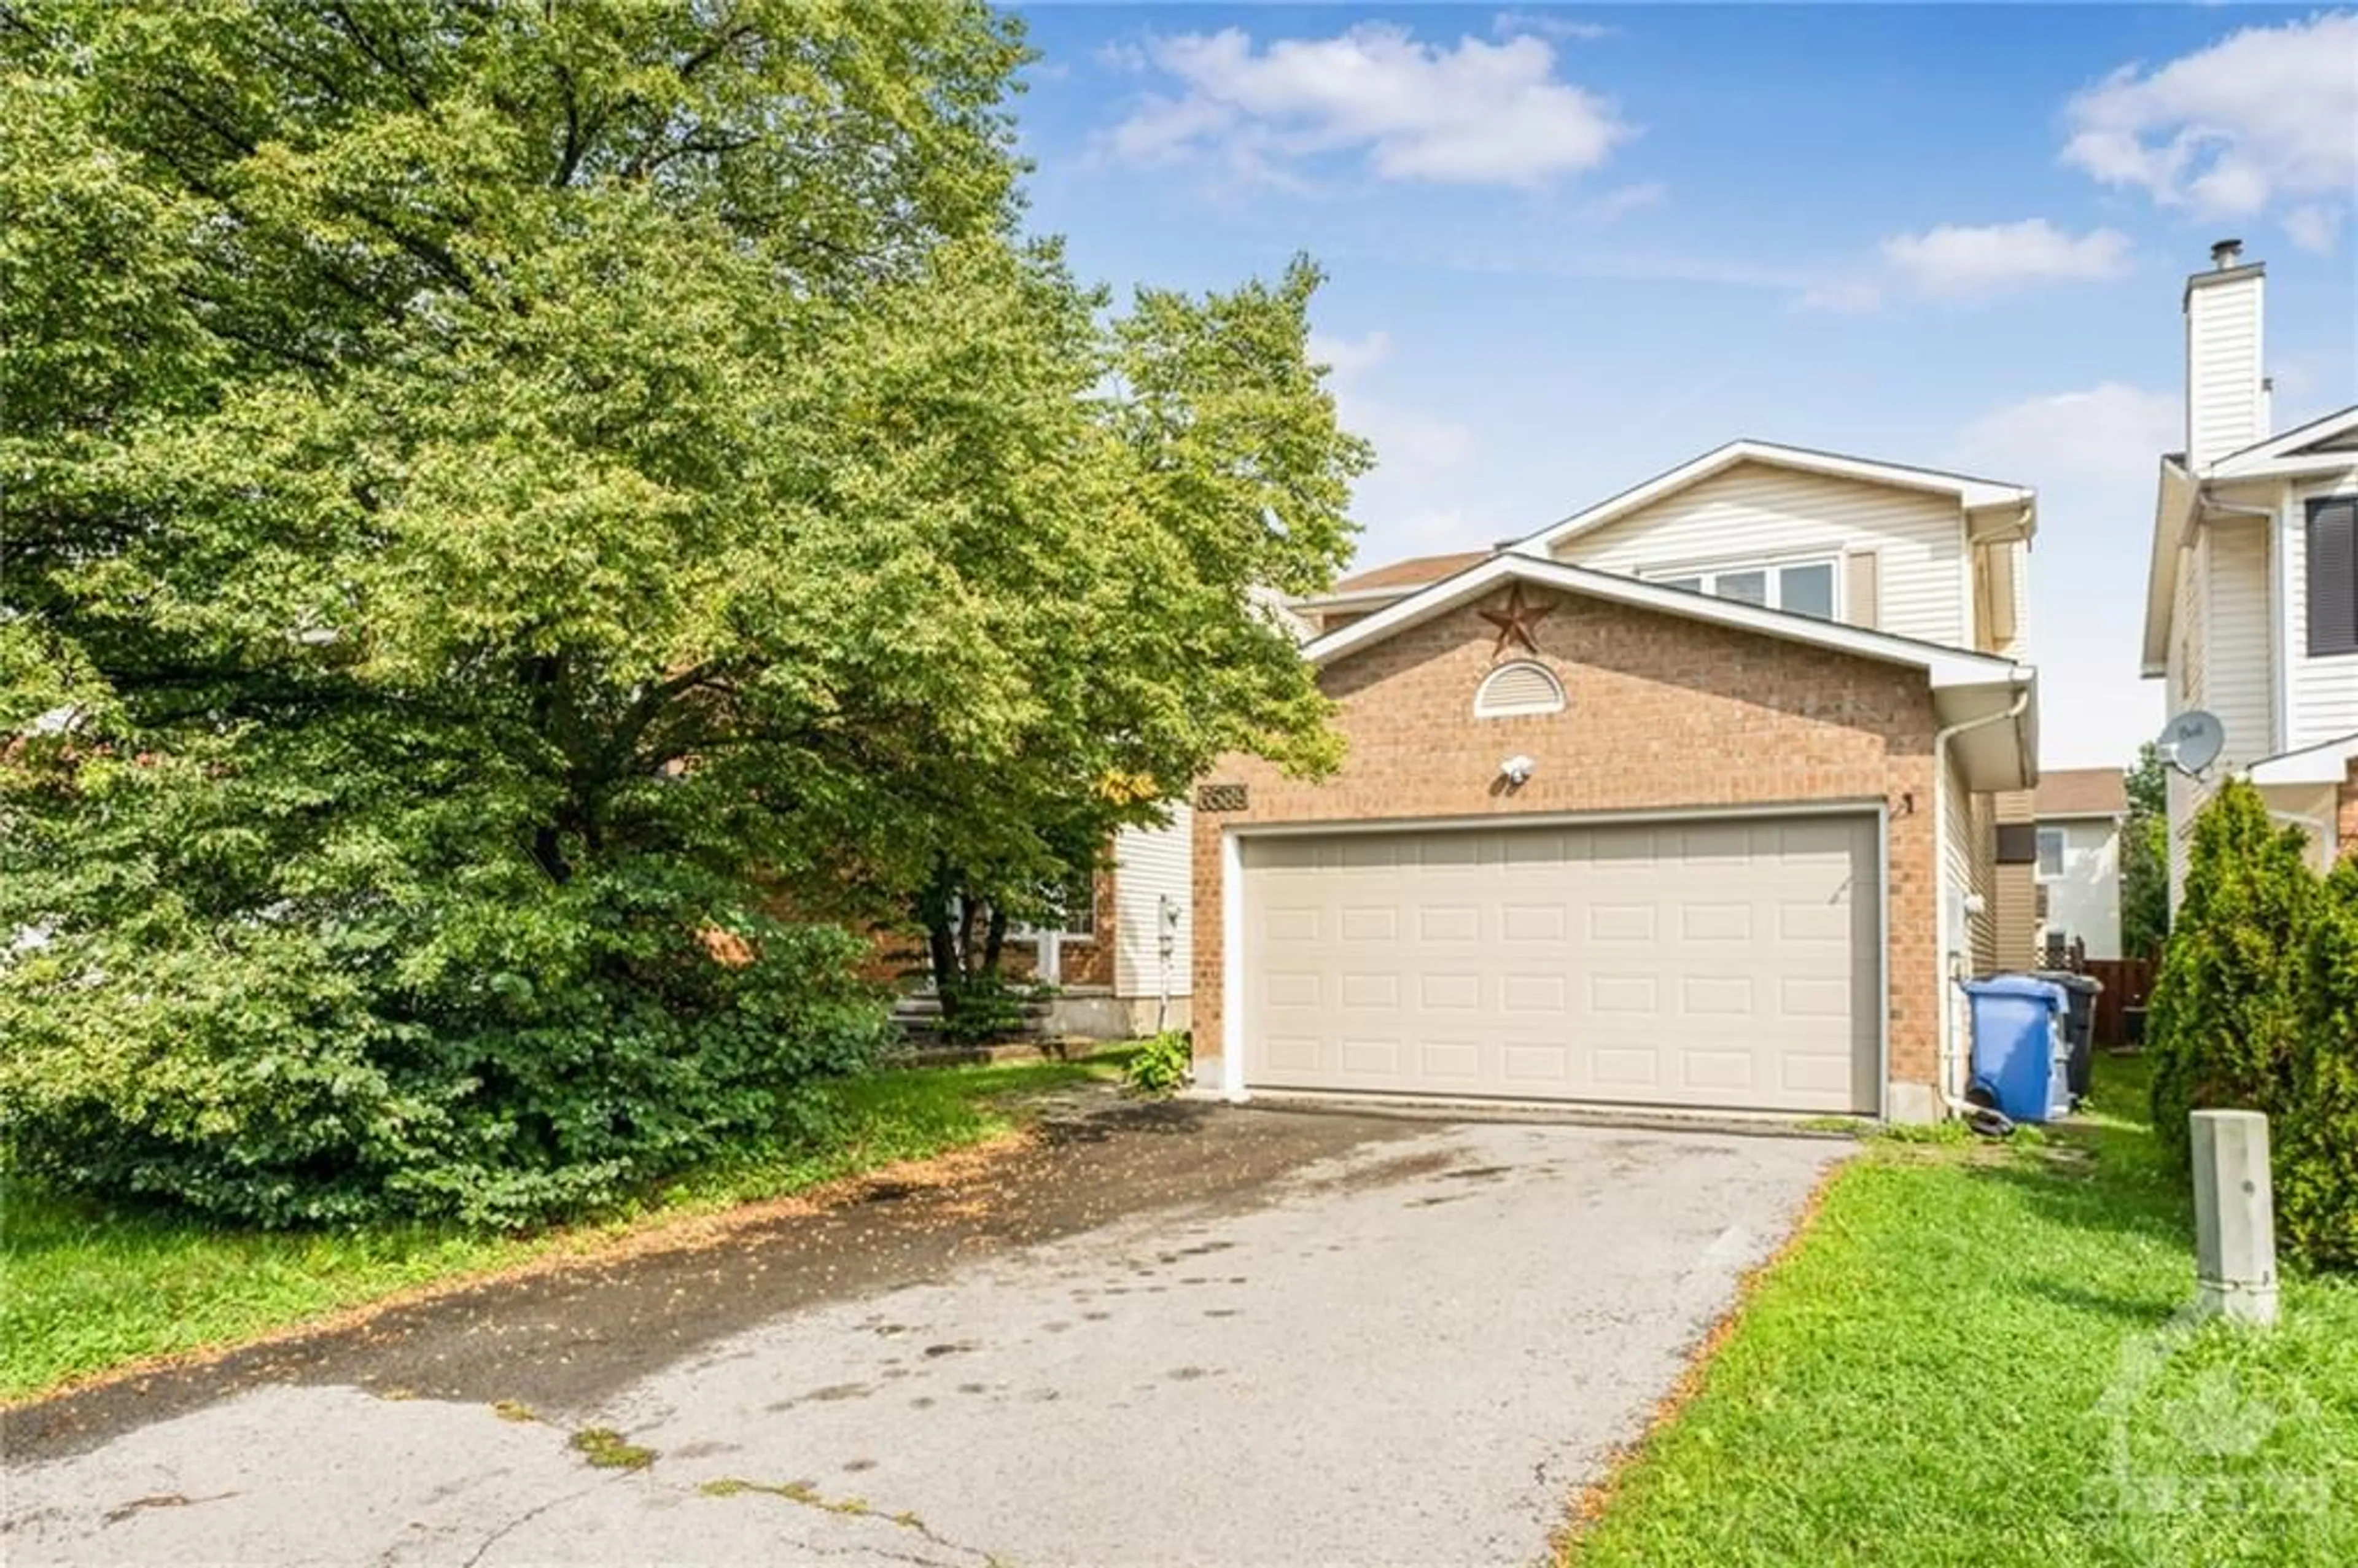 A pic from exterior of the house or condo for 6589 DES MERLES Lane, Orleans Ontario K1C 6P4